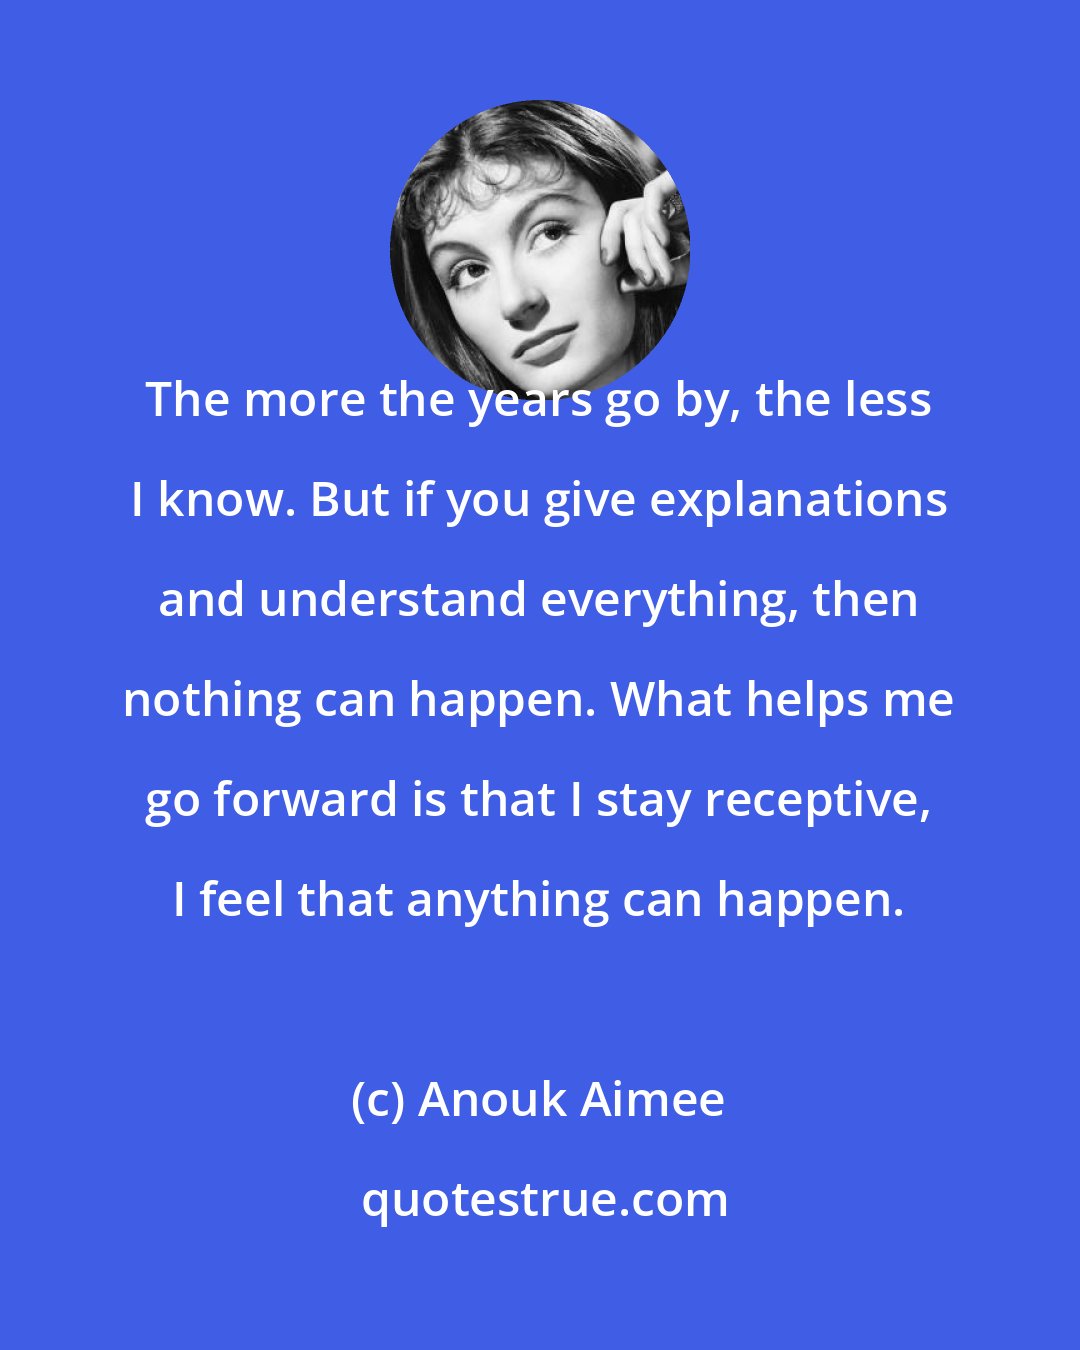 Anouk Aimee: The more the years go by, the less I know. But if you give explanations and understand everything, then nothing can happen. What helps me go forward is that I stay receptive, I feel that anything can happen.